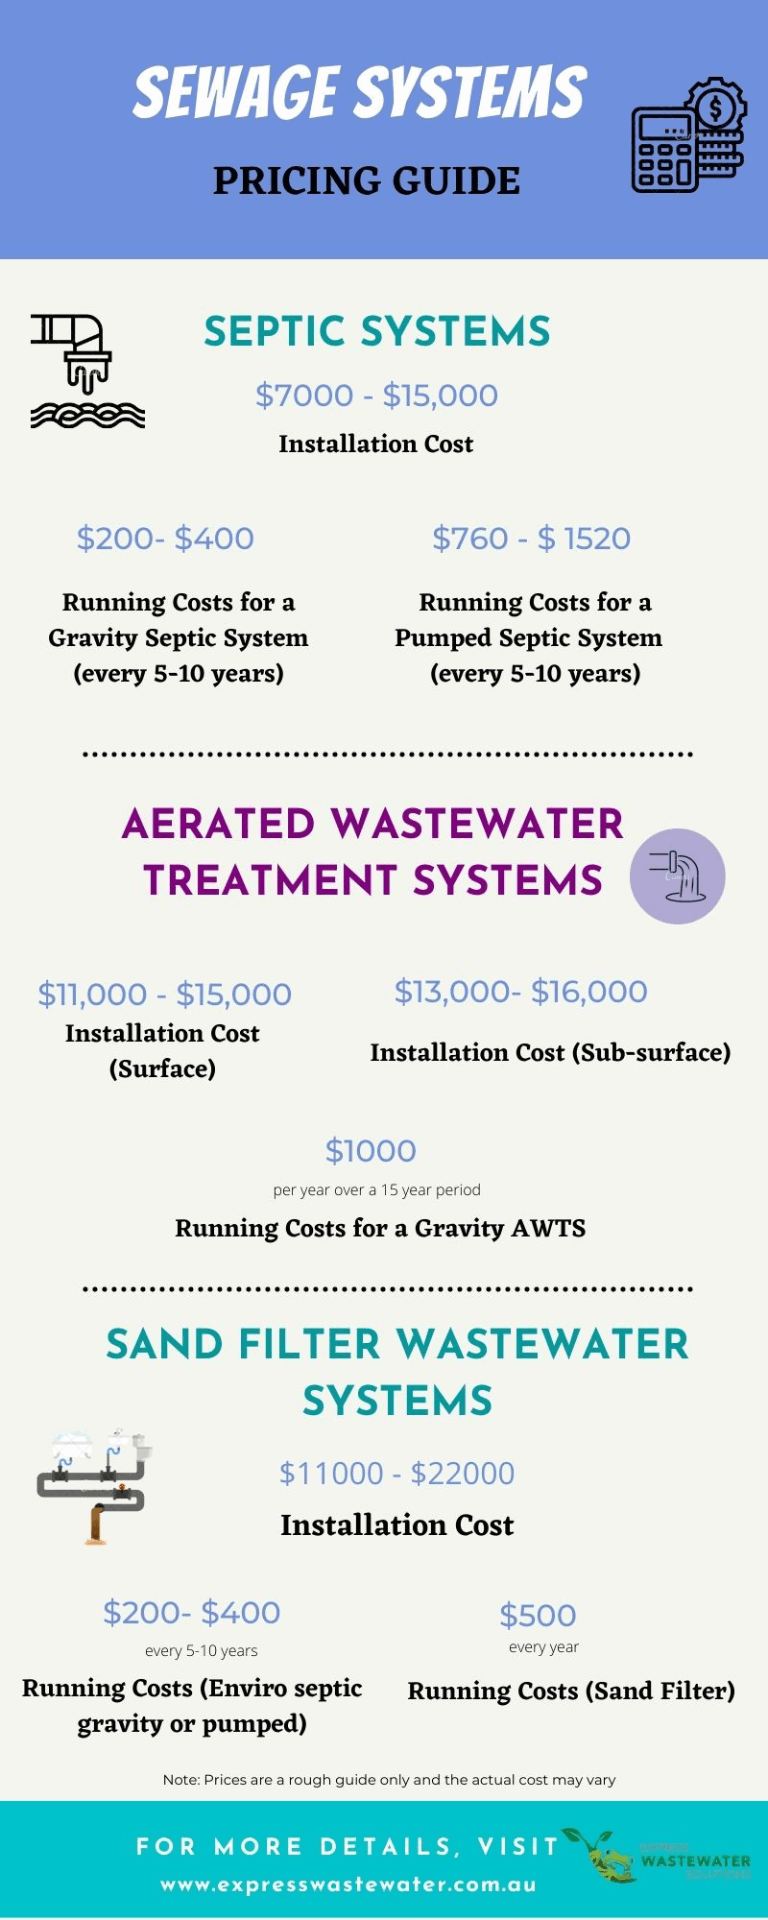 Wastewater treatment system Price Guide infographic